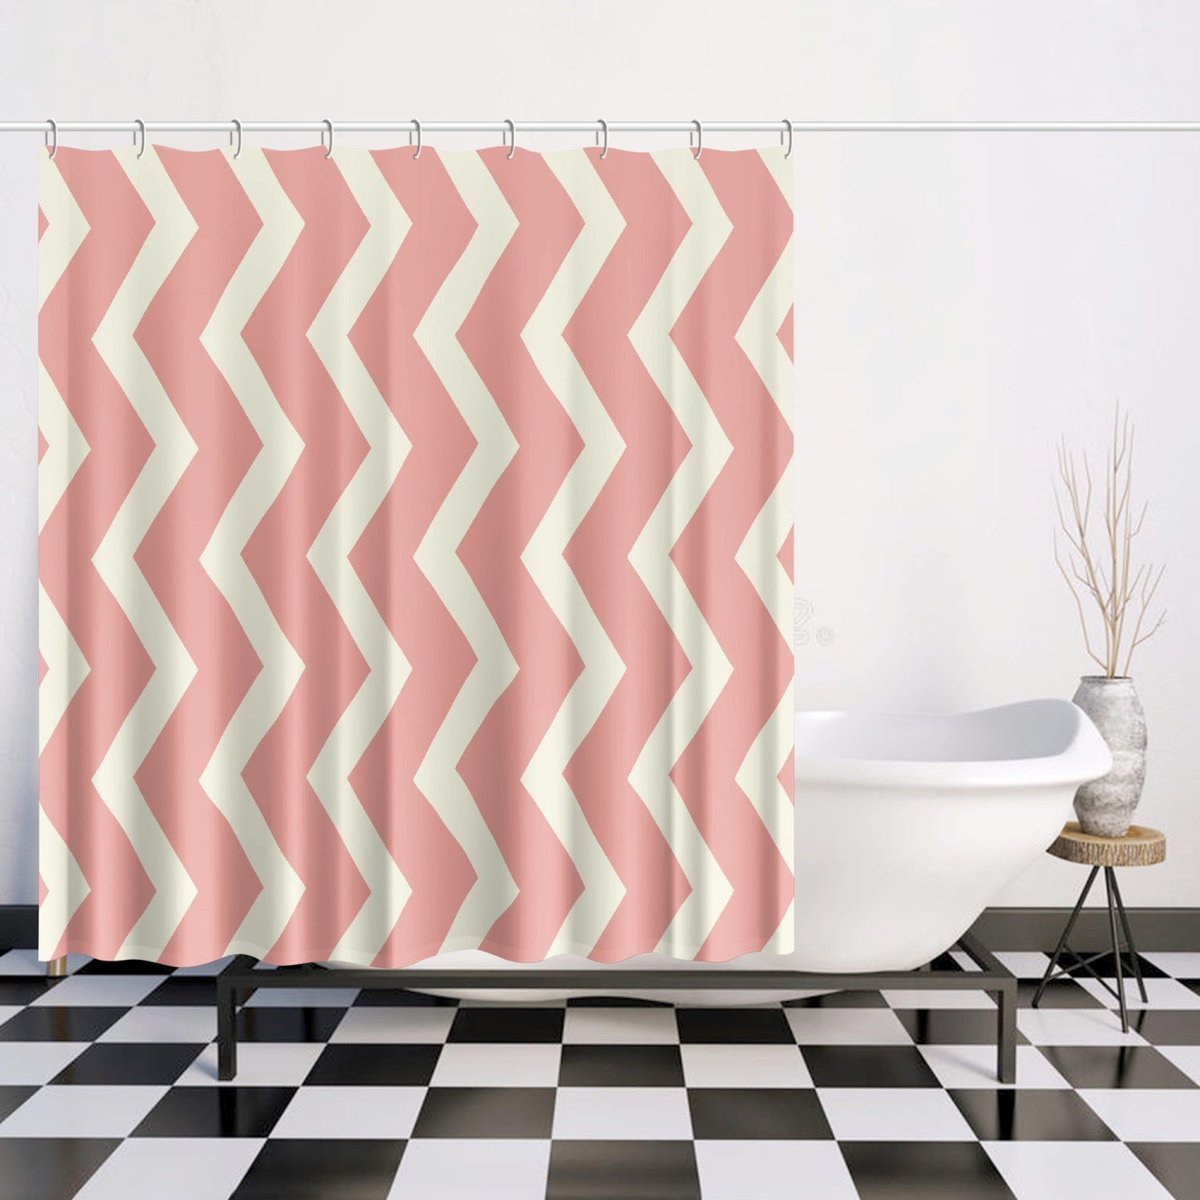 Pink Zig Zag Shower Curtain: Where style meets function 🎨🚿 Find your perfect match—link in bio.#BathroomDecor #BathroomMakeover #ShowerCurtains #BathTime #BathroomStyle #BathroomDetails #LuxuryBathroom #BathroomInspo #ShowerDecor #WaterproofDecor
 showercurtainco.com/products/171-q…